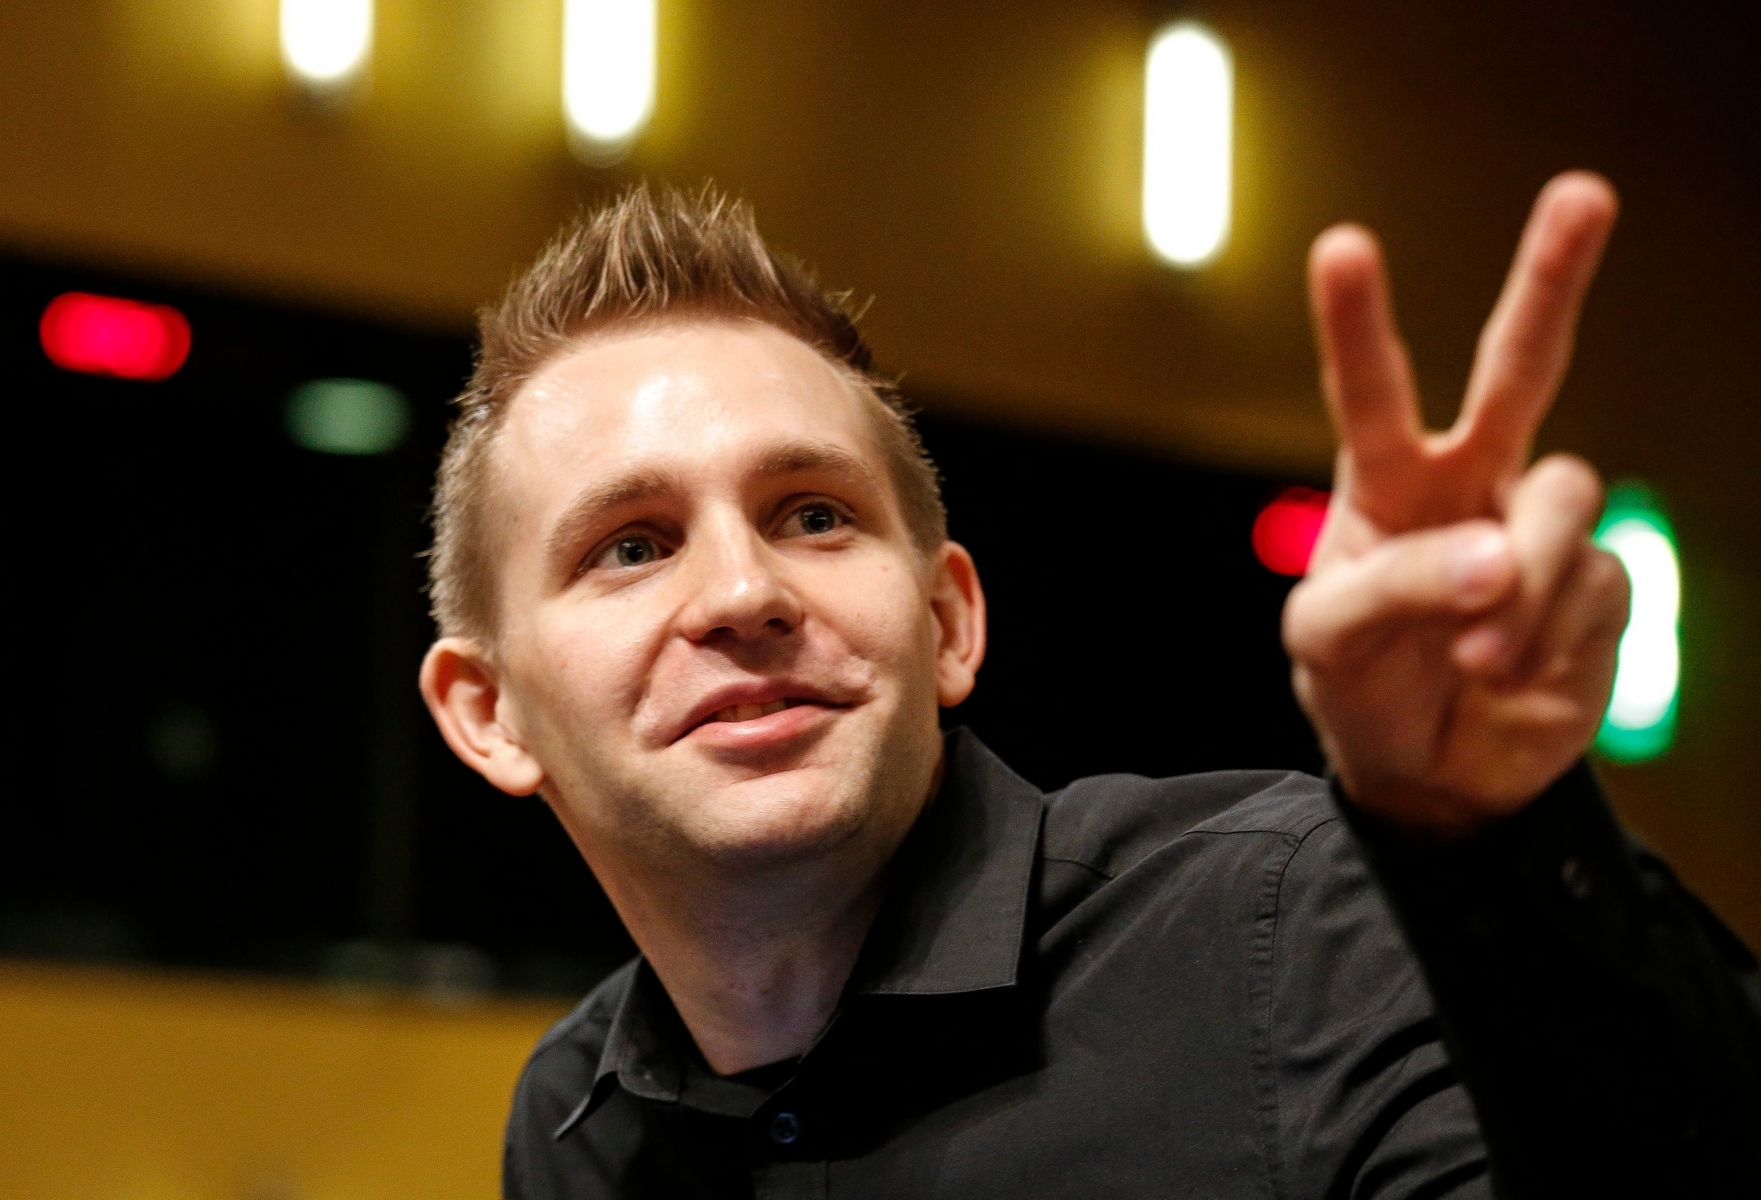 epa04965311 Austrian Max Schrems waits for the verdict of the European Court of Justice in Luxembourg, 06 October 2015. Max Schrems filed a data privacy infringement lawsuits against Facebook, the online social networking service .  EPA/JULIEN WARNAND LUXEMBOURG JUSTICE MAX SCHREMS